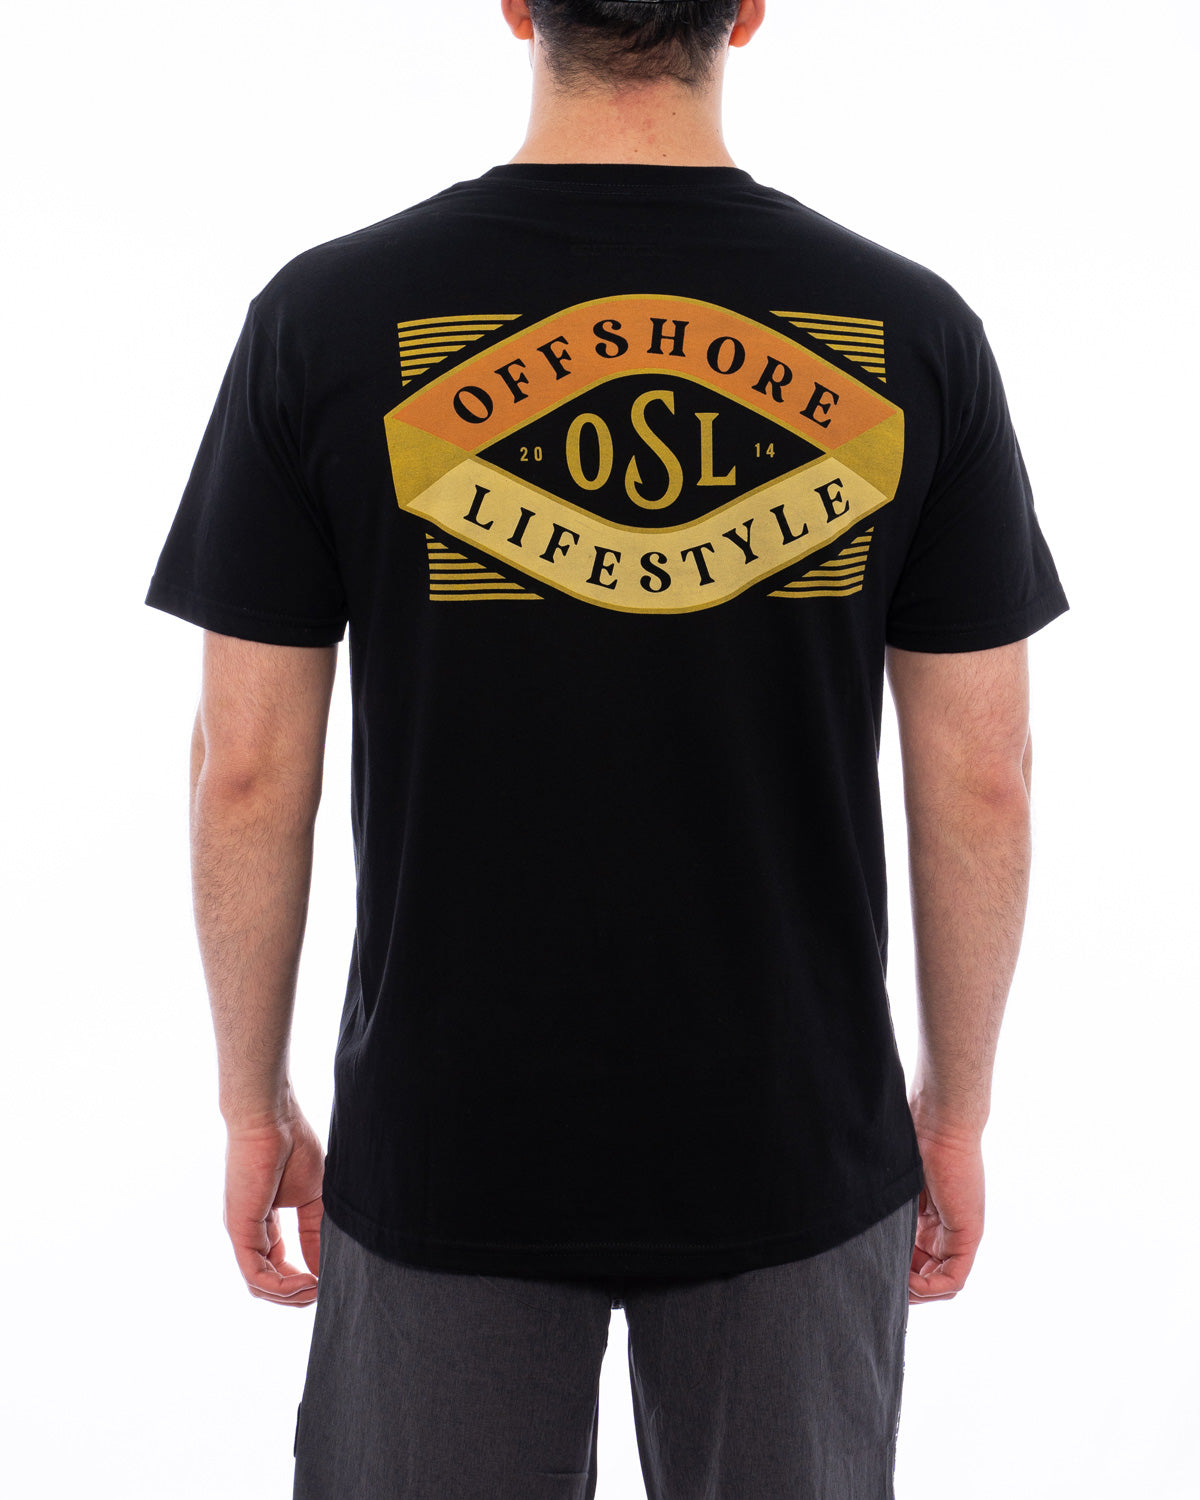 OSL BANNER – Offshore Lifestyle